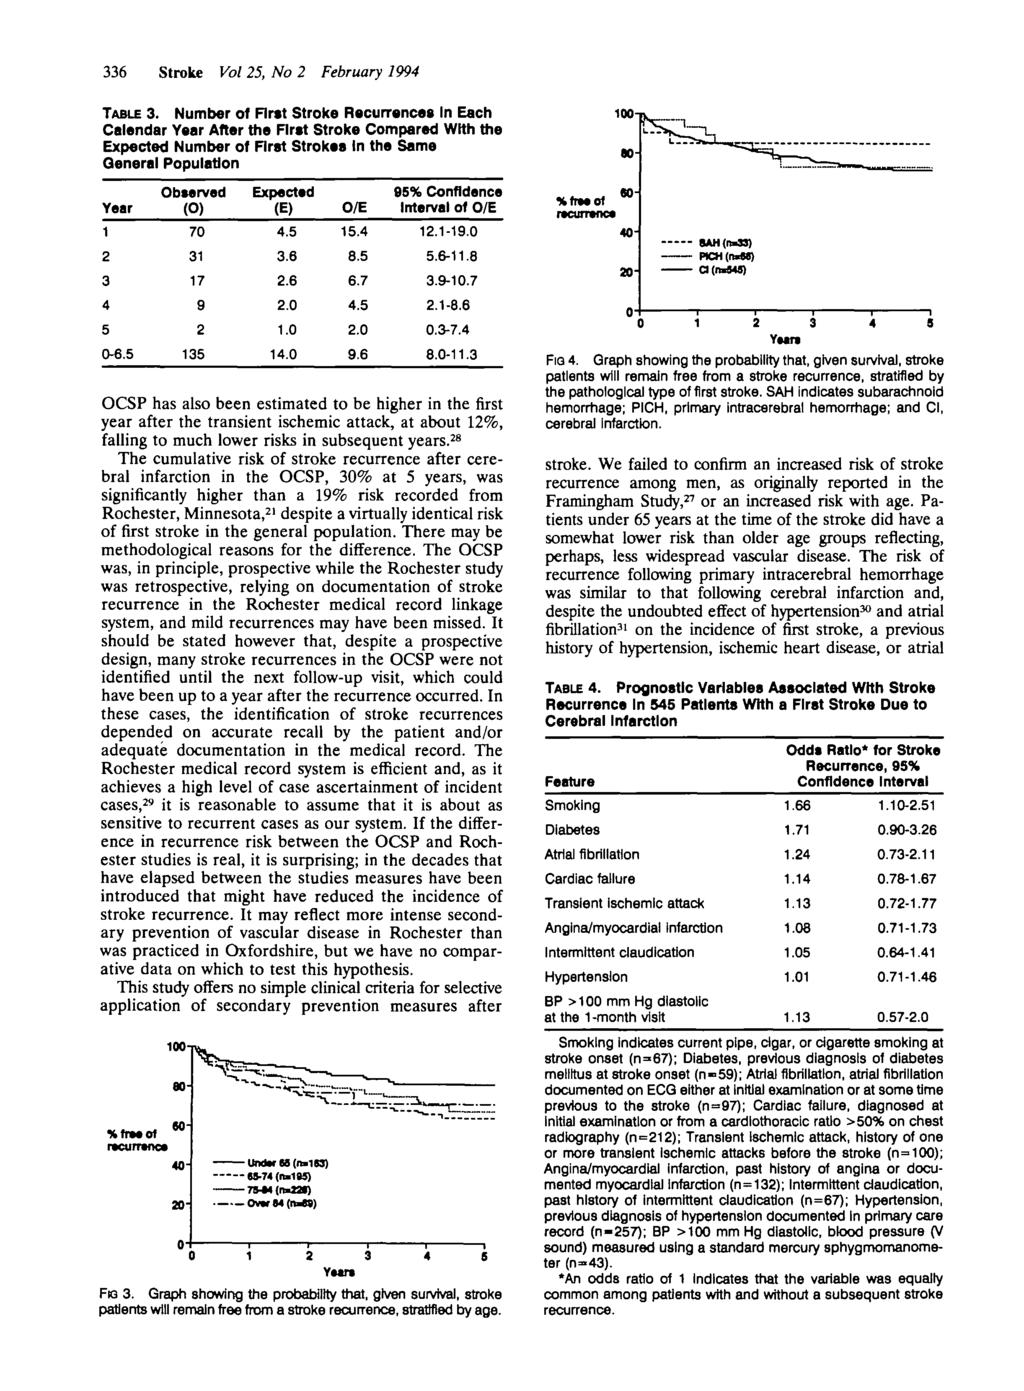 6 Stroke Vol 5, No February 1994 Downloaded from http://ahajournals.org by on January 1, 19 TABLE.